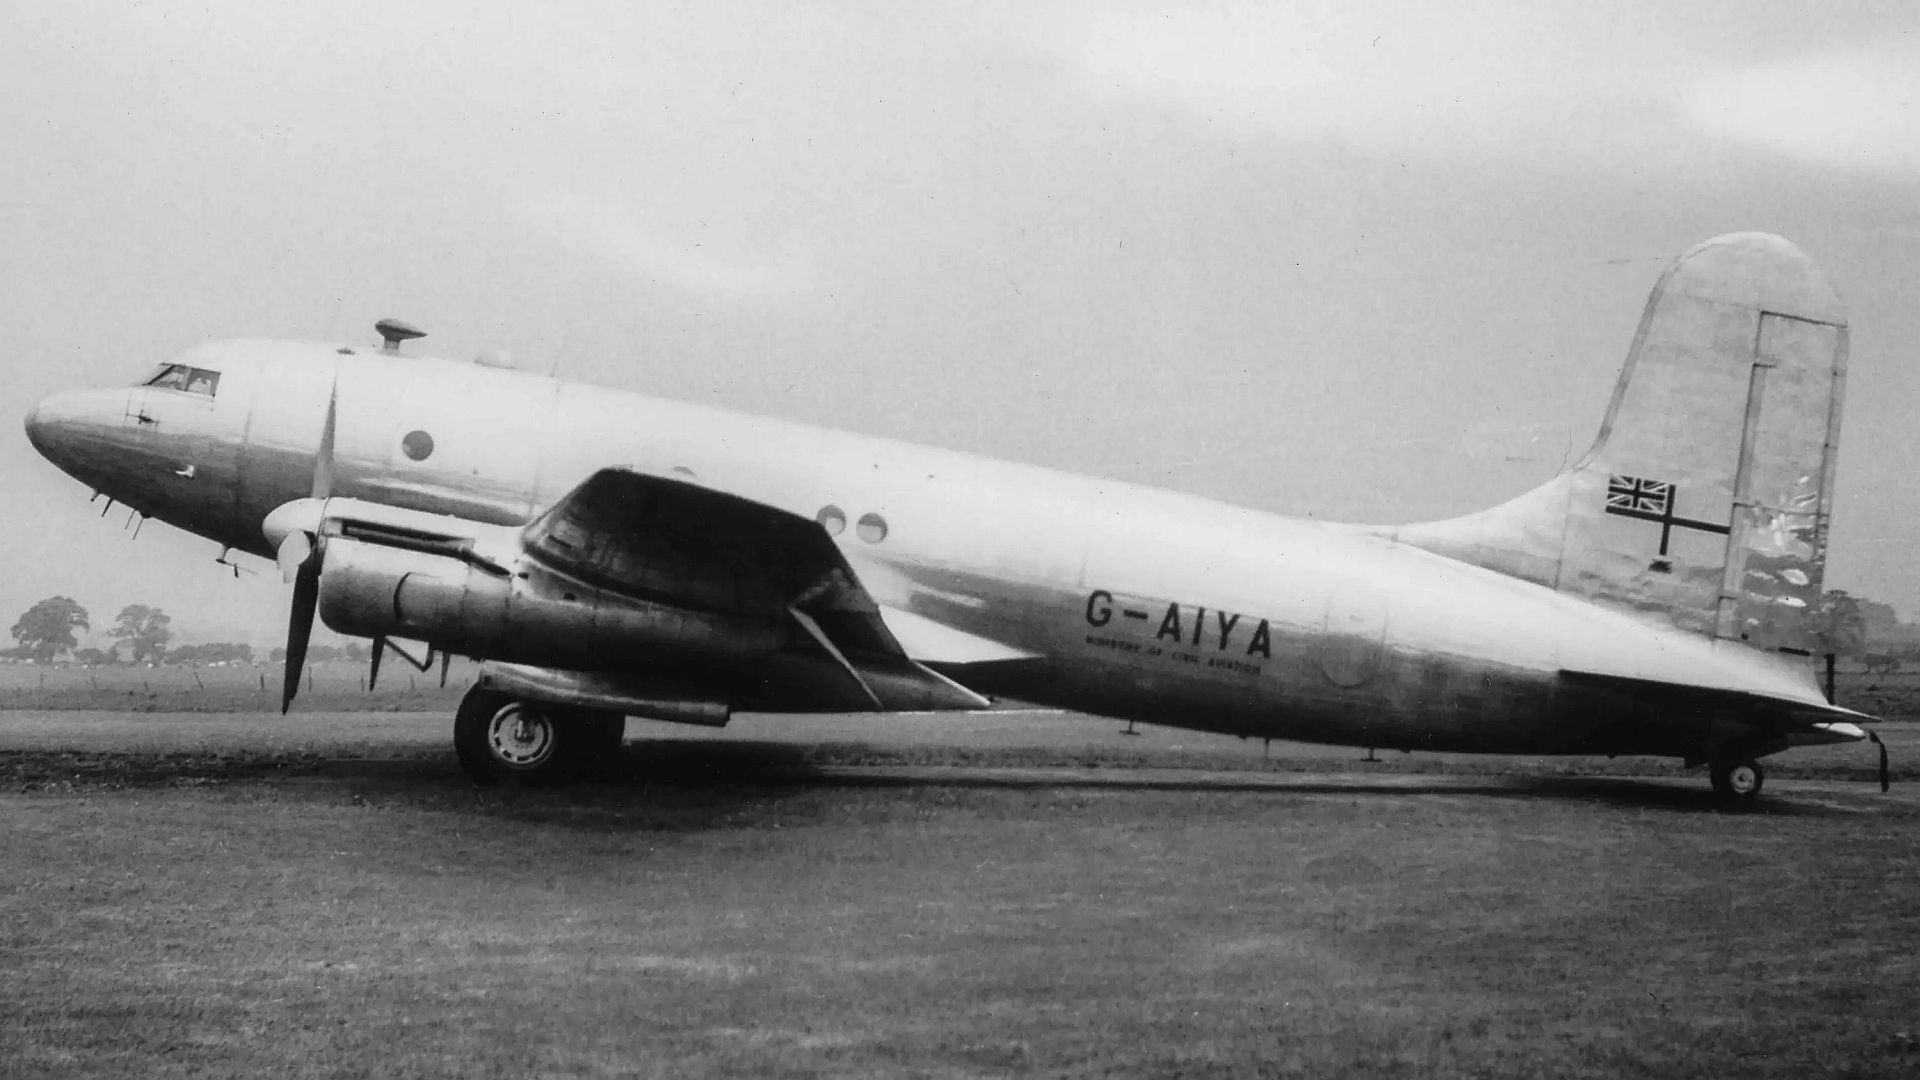 AIYA Is The First Of Two Aircraft Converted To Ministerial Executive Transports